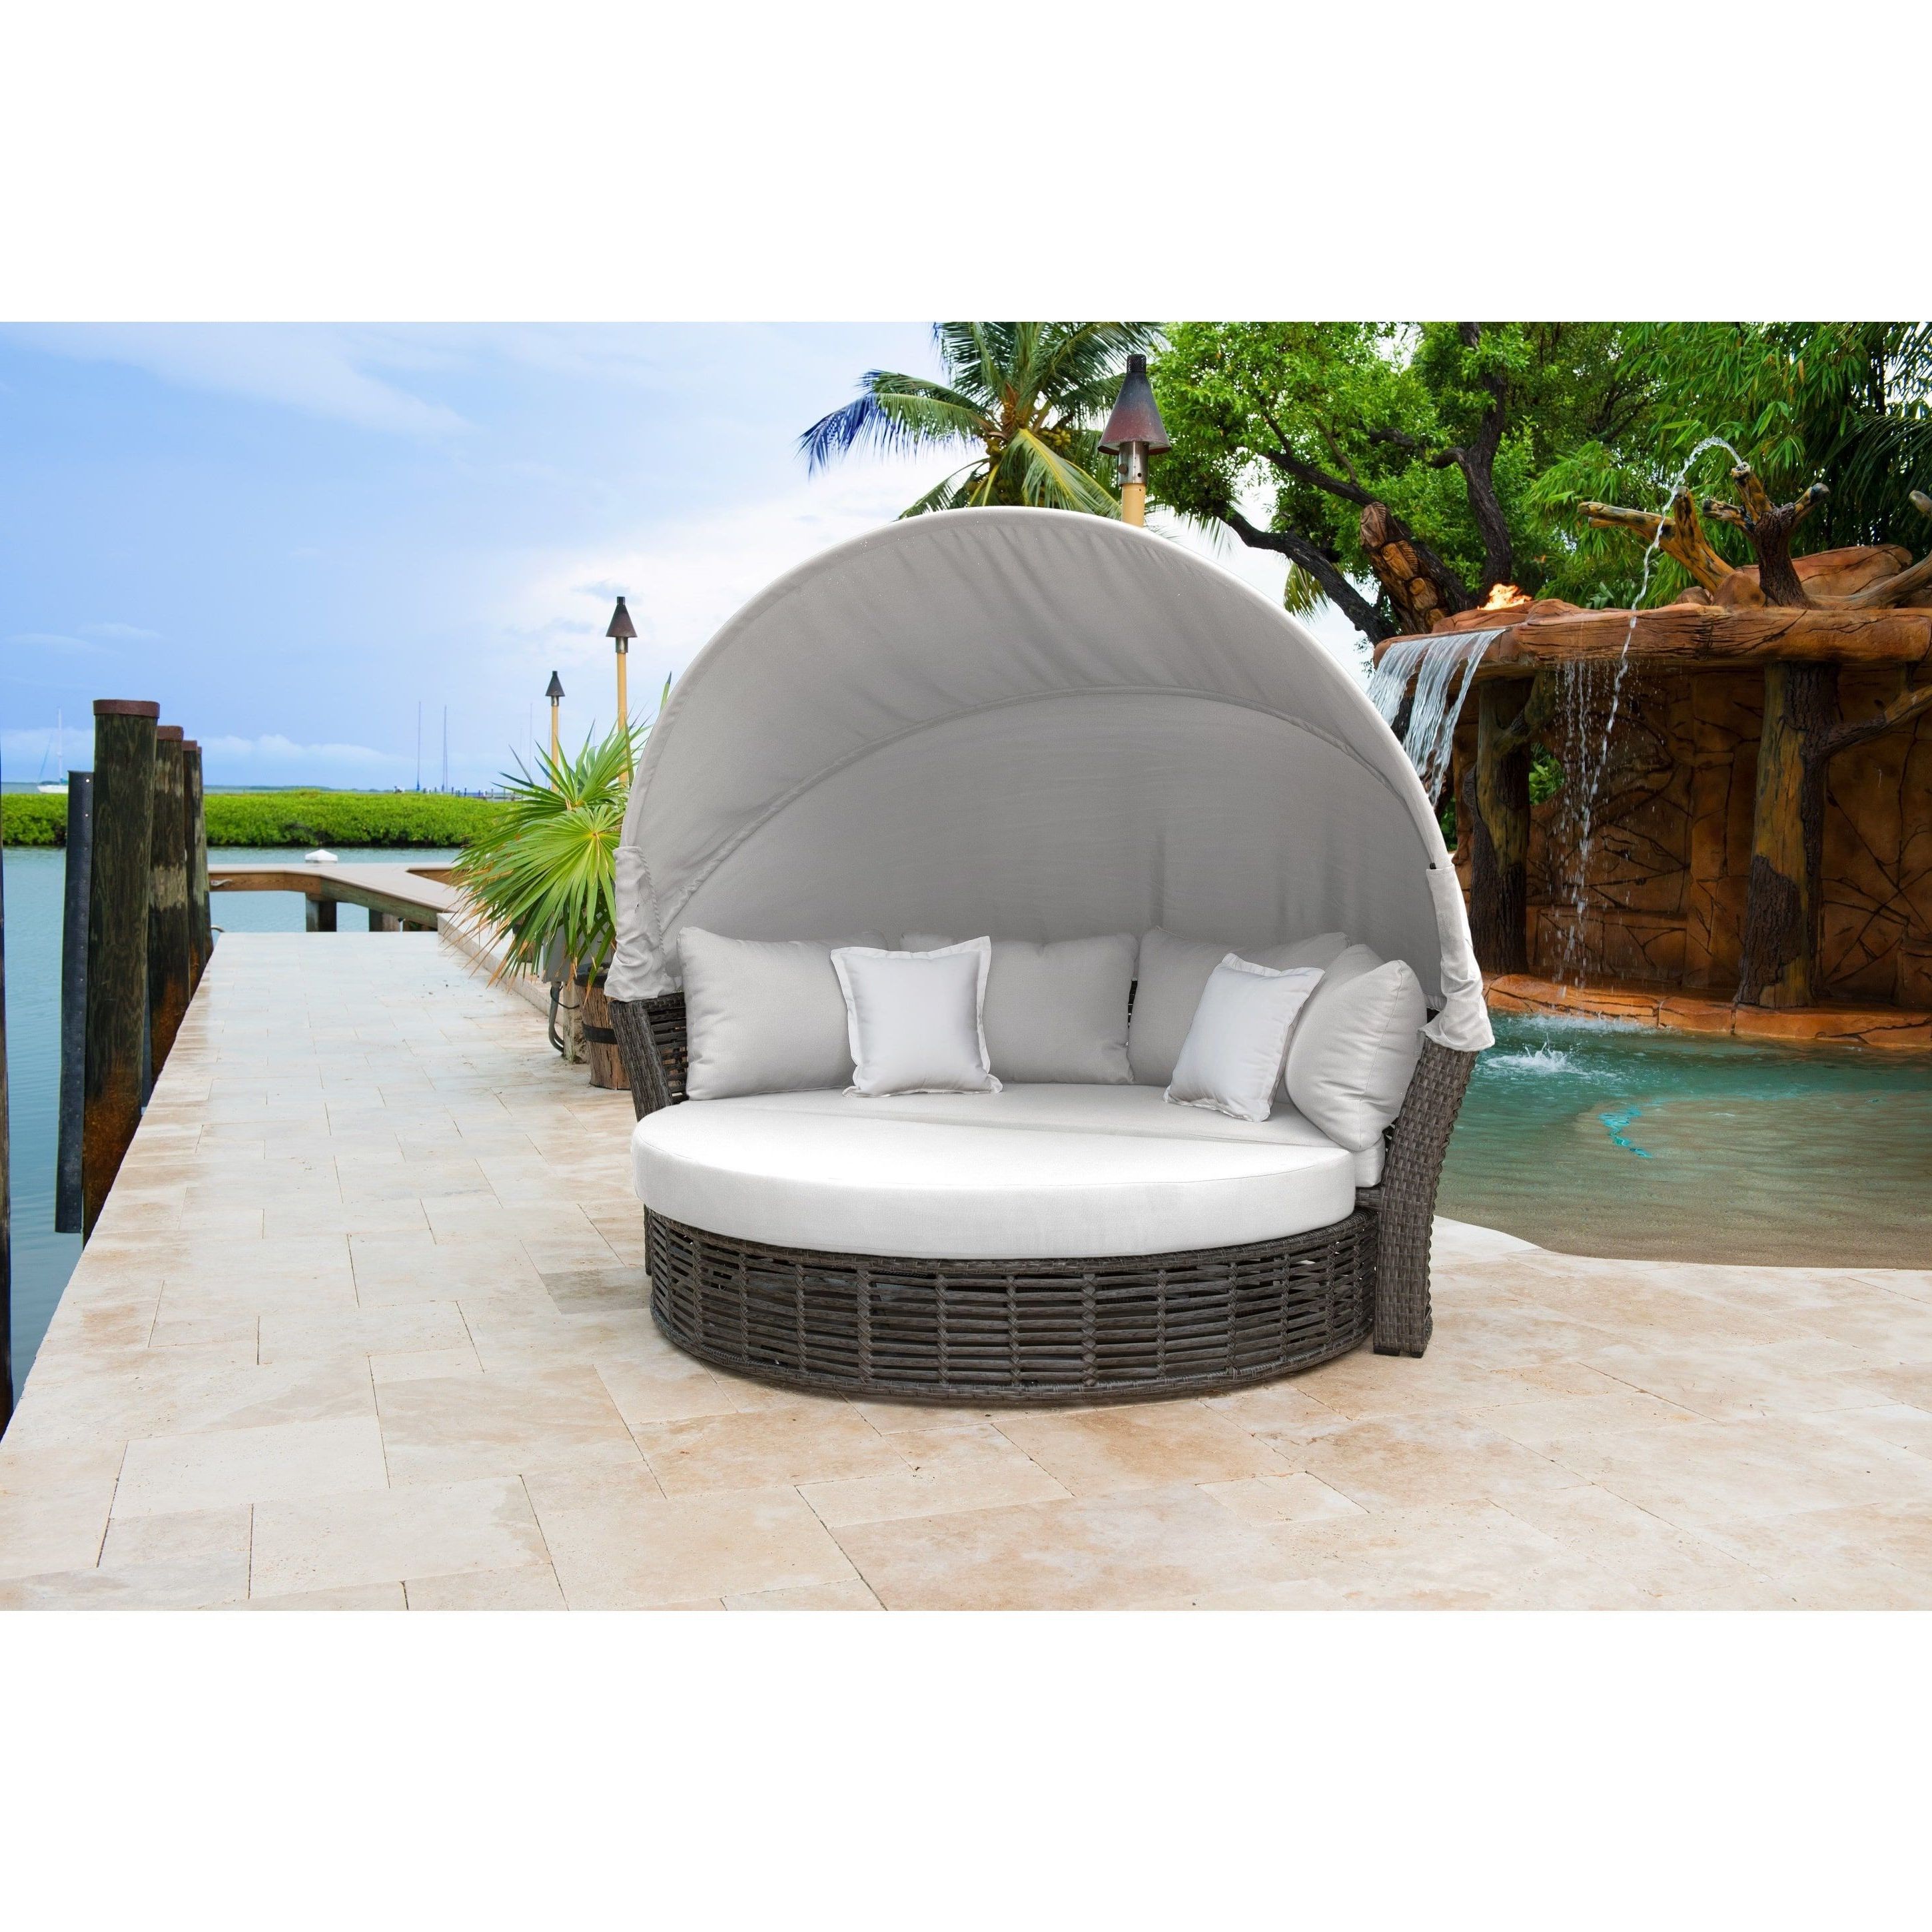 Panama Jack Graphite Resin Wicker/aluminum Canopy Daybed Intended For Preferred Tiana Patio Daybeds With Cushions (View 10 of 20)